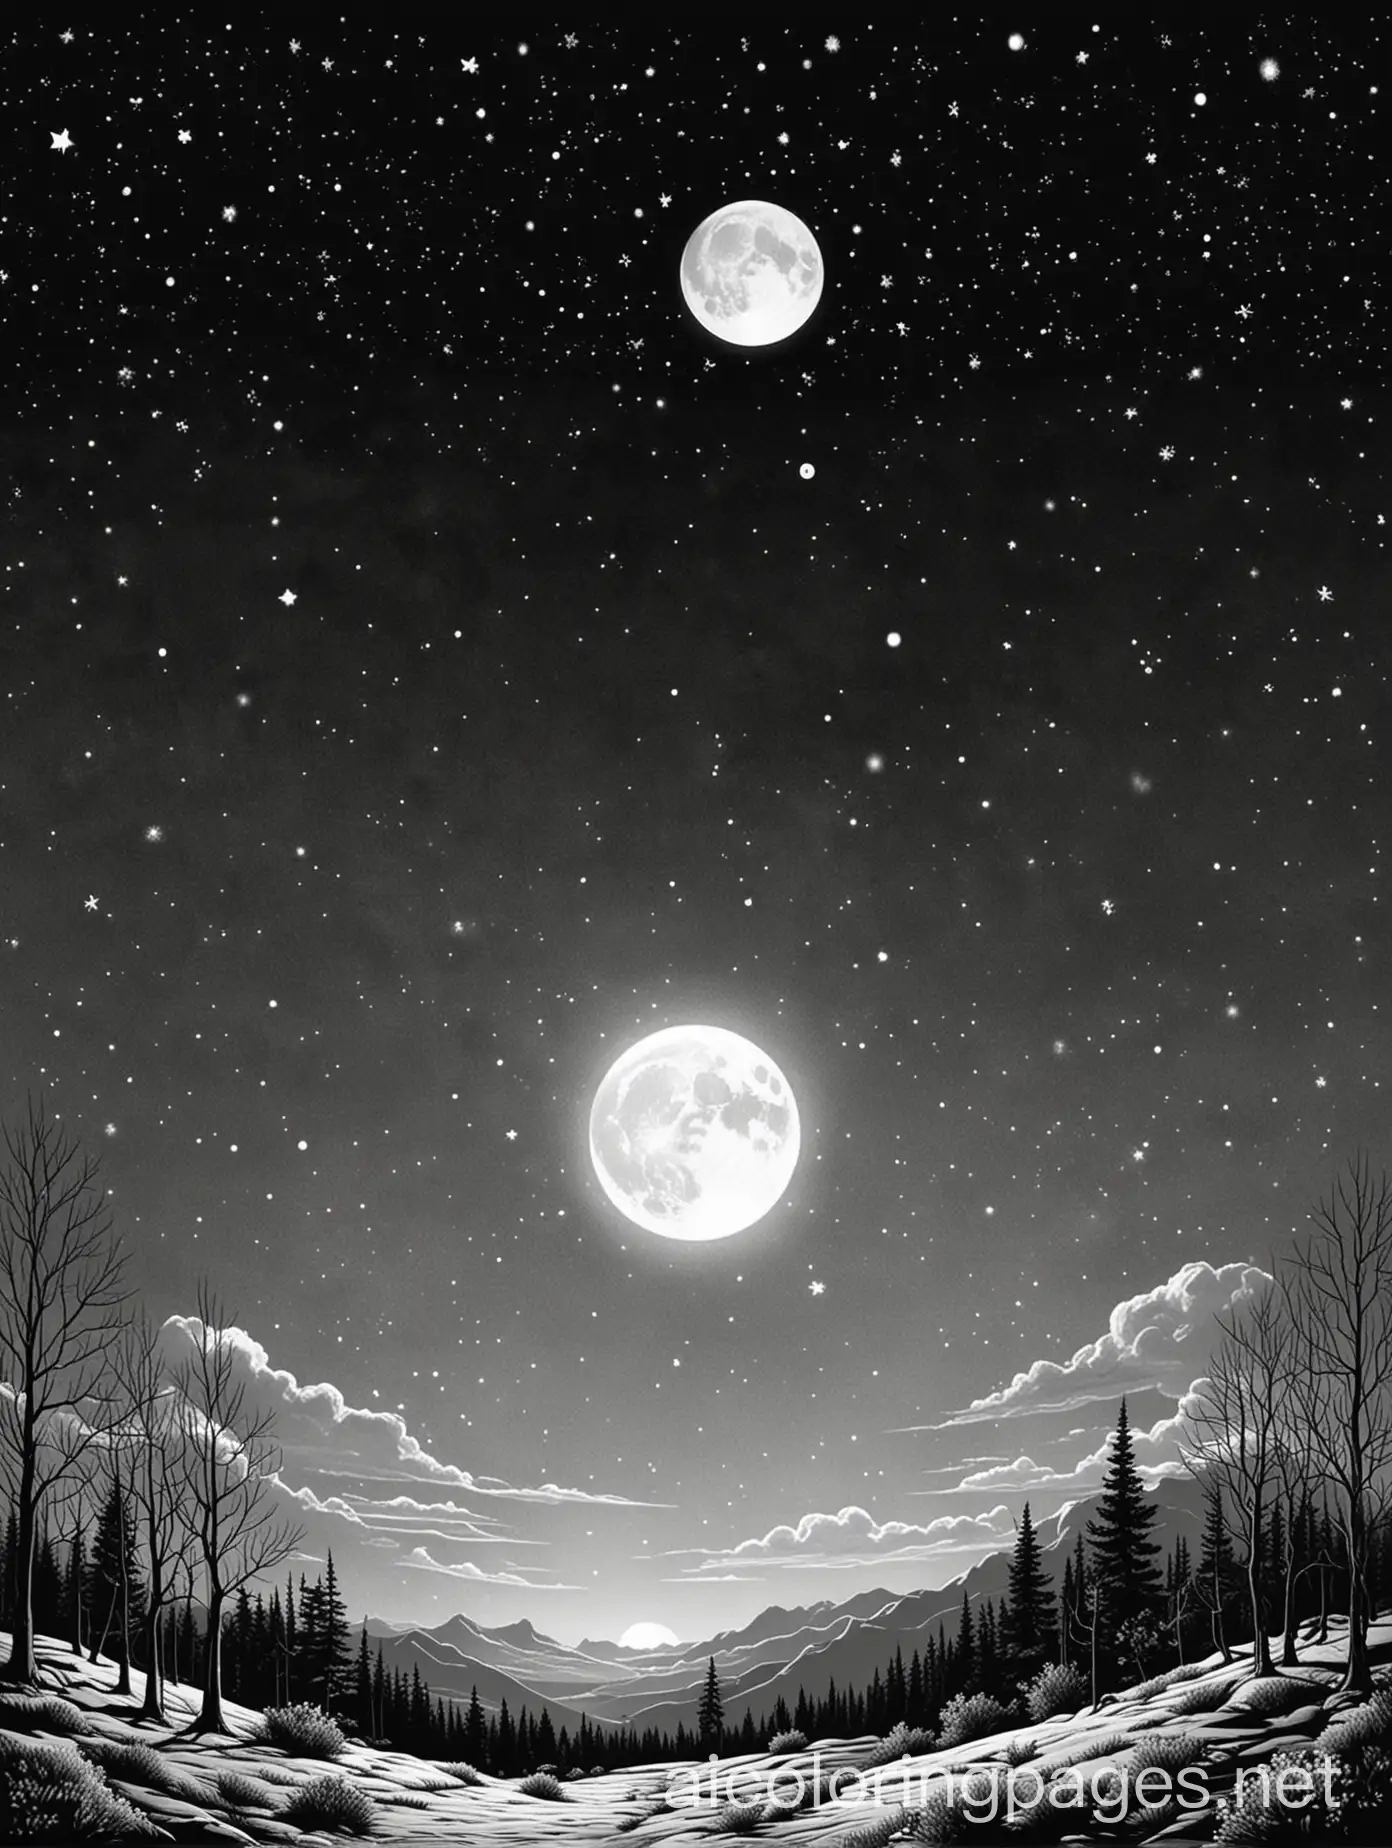 Peaceful-Christmas-Night-Coloring-Page-with-Moonlit-Sky